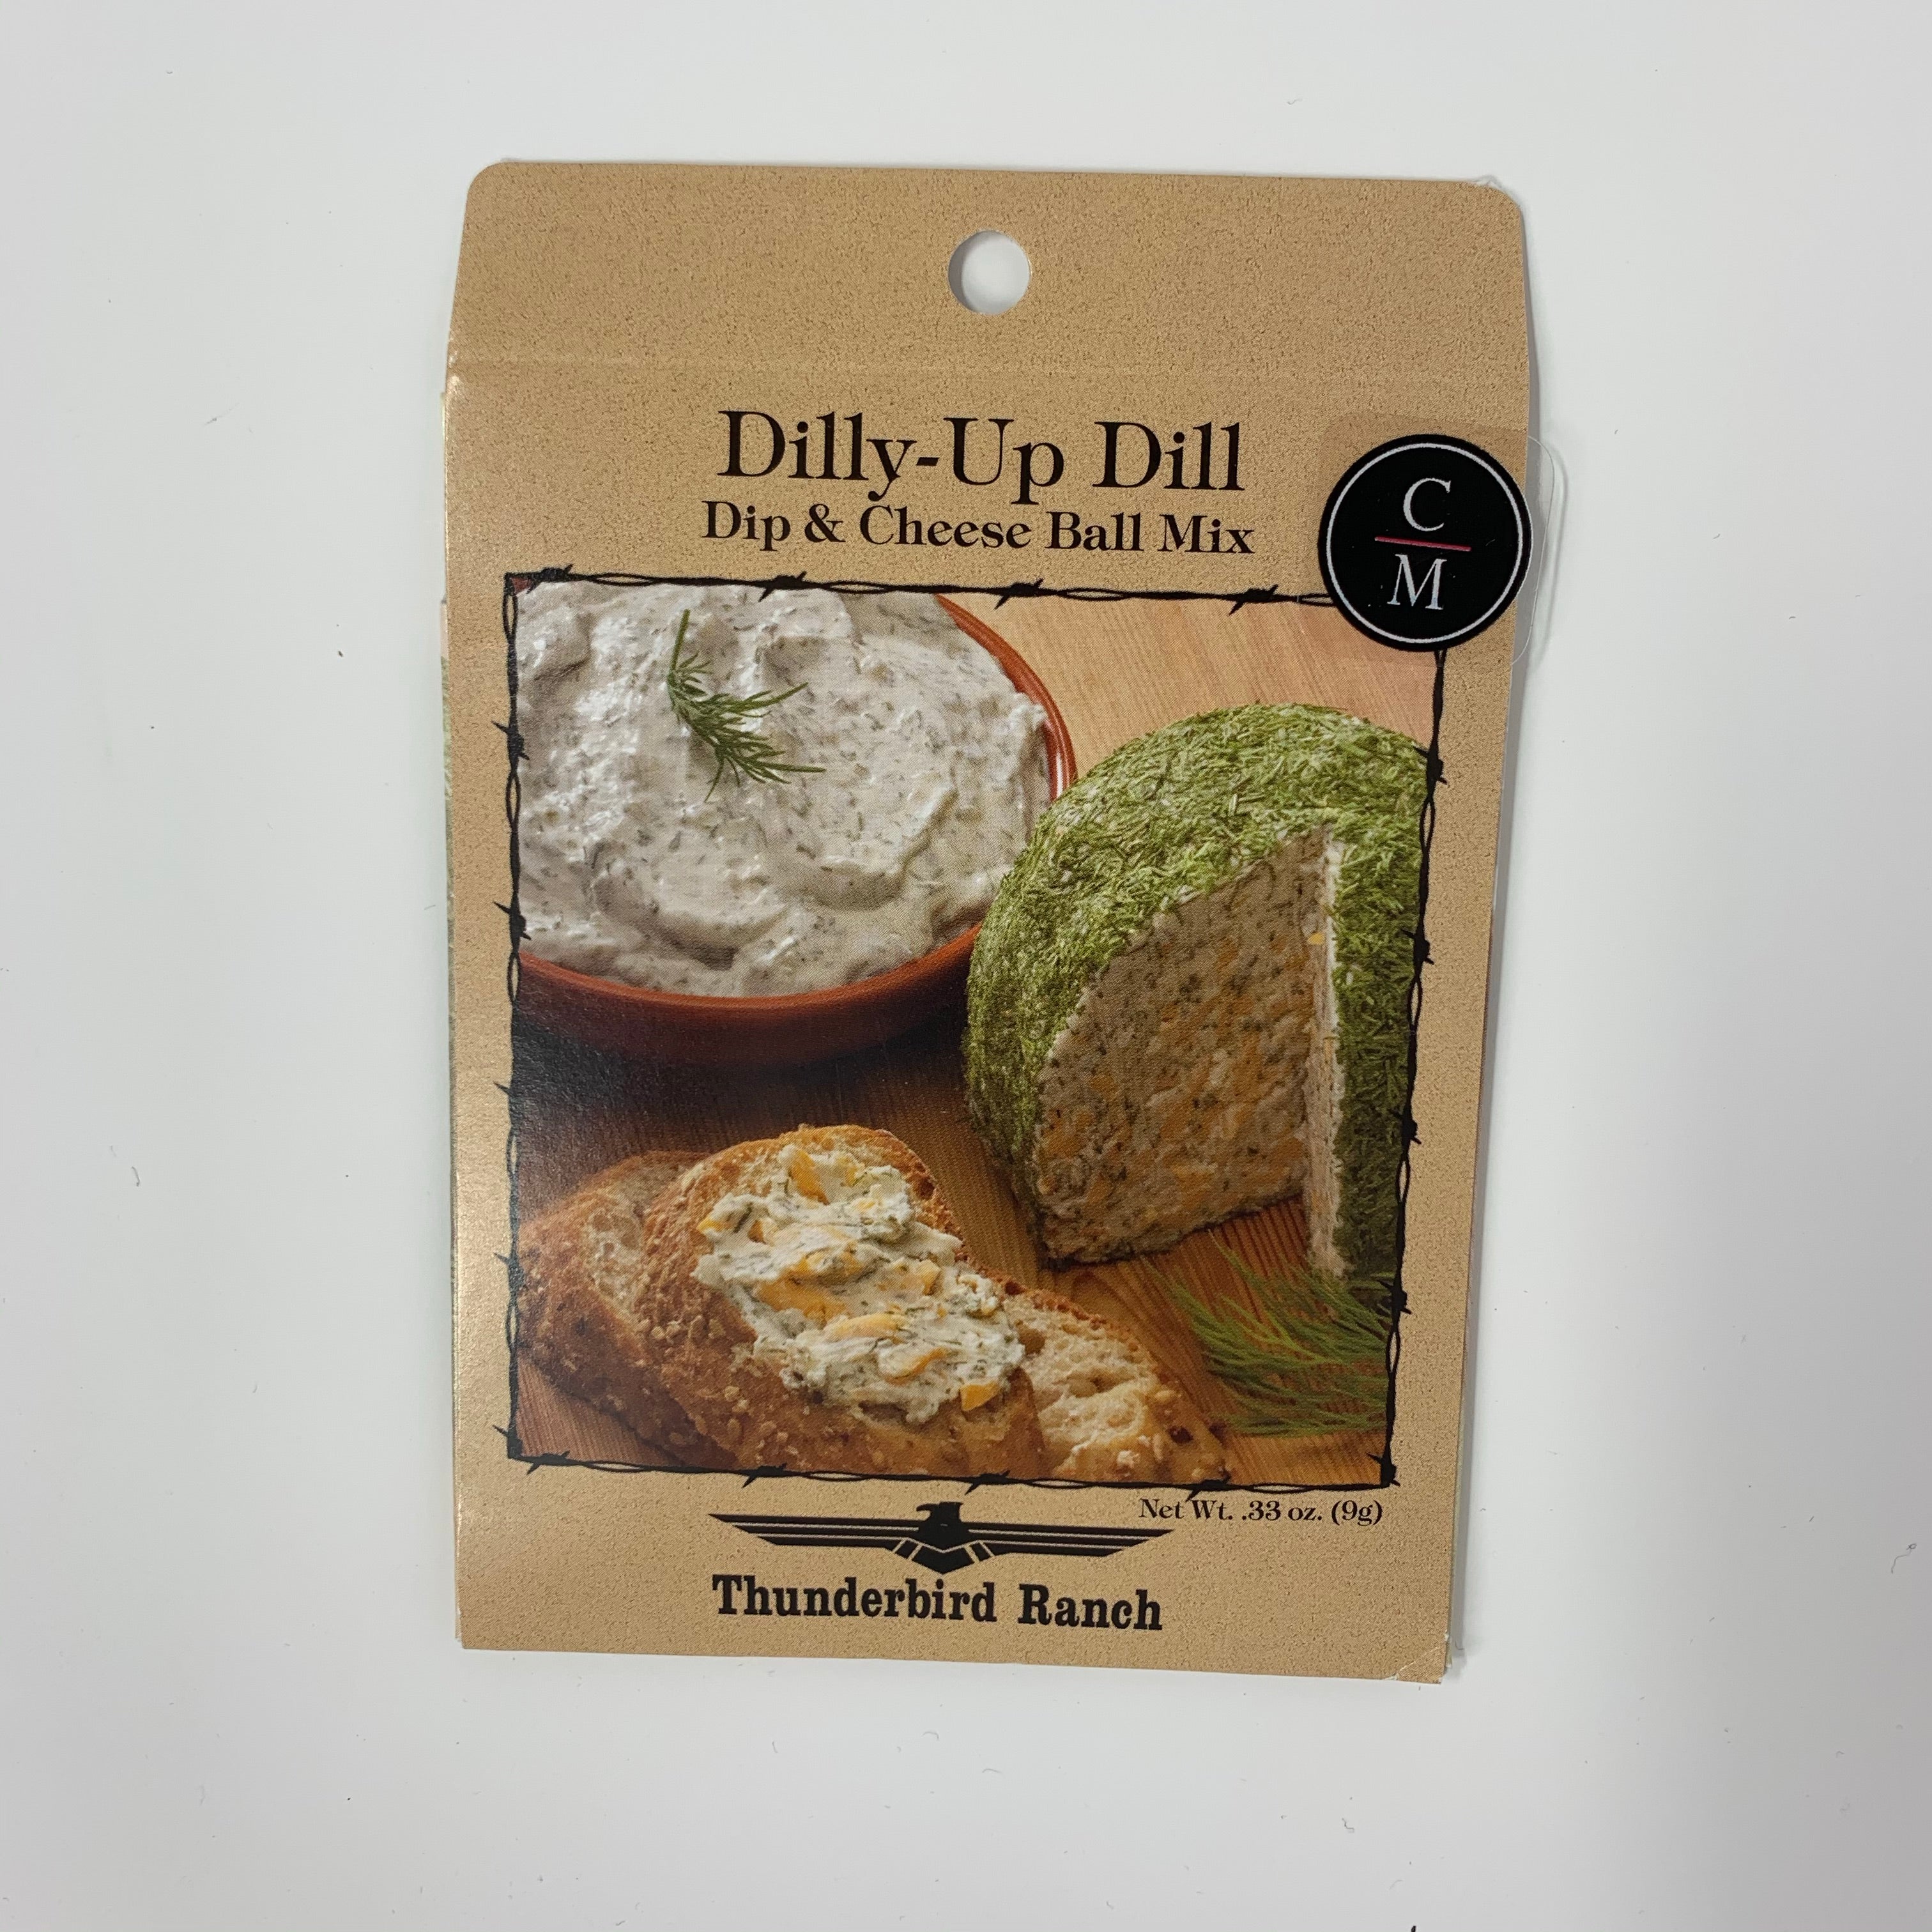 Dilly-Up Dill